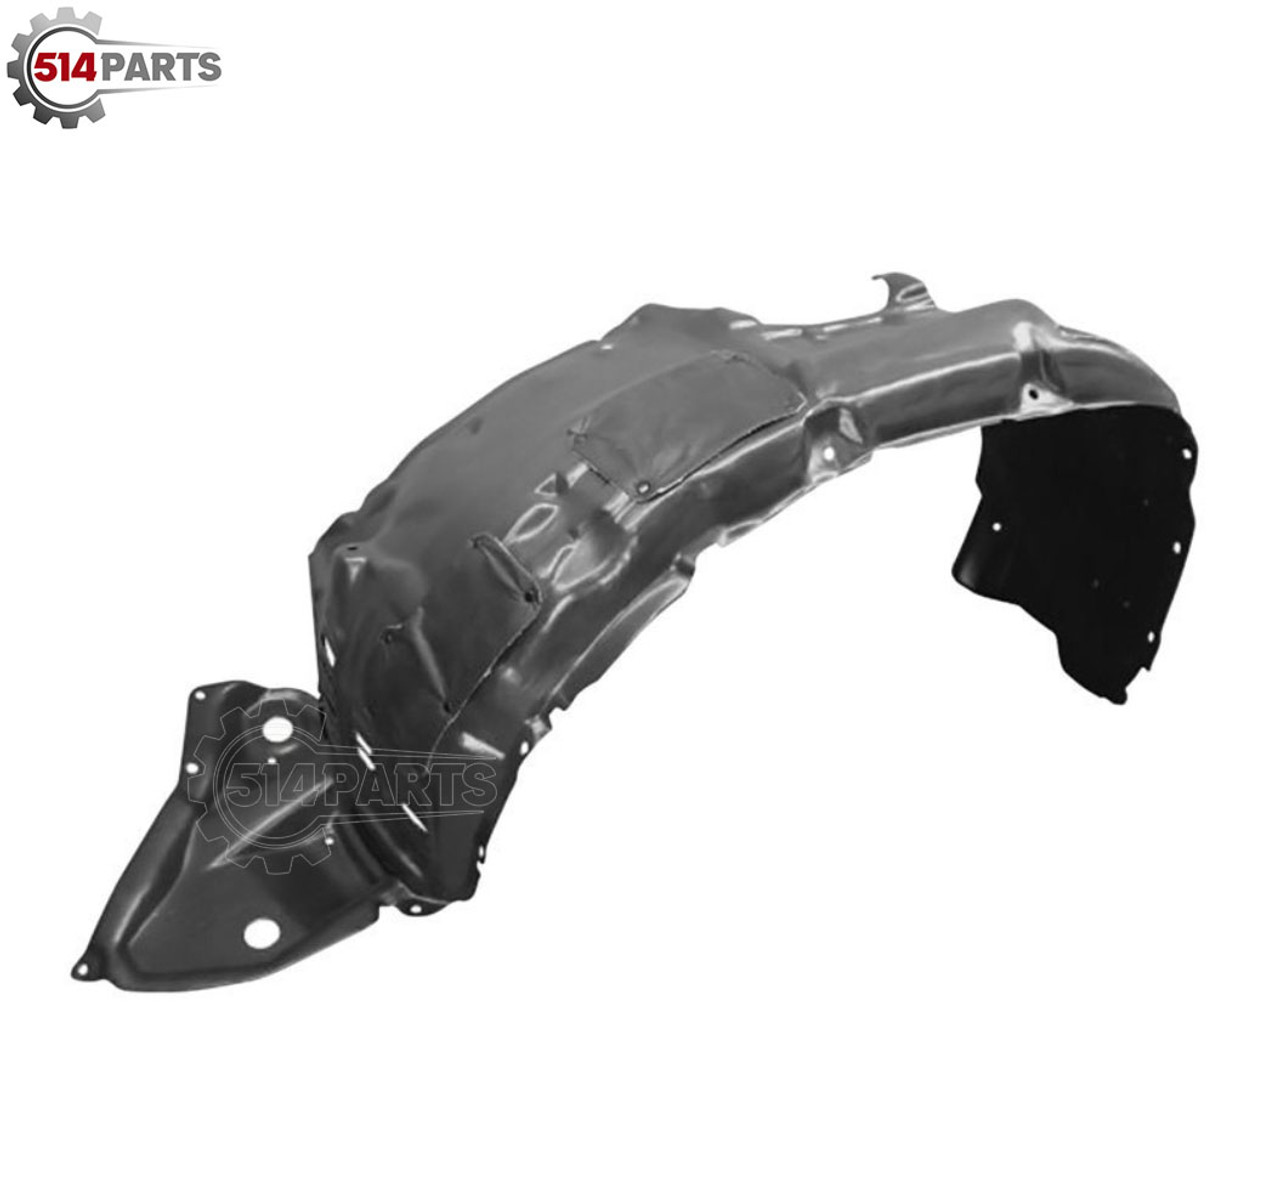 2014 - 2019 TOYOTA HIGHLANDER 2.7L FENDER LINER with EXTENSION SHEET - FAUSSE AILE avec FEUILLE D'EXTENSION